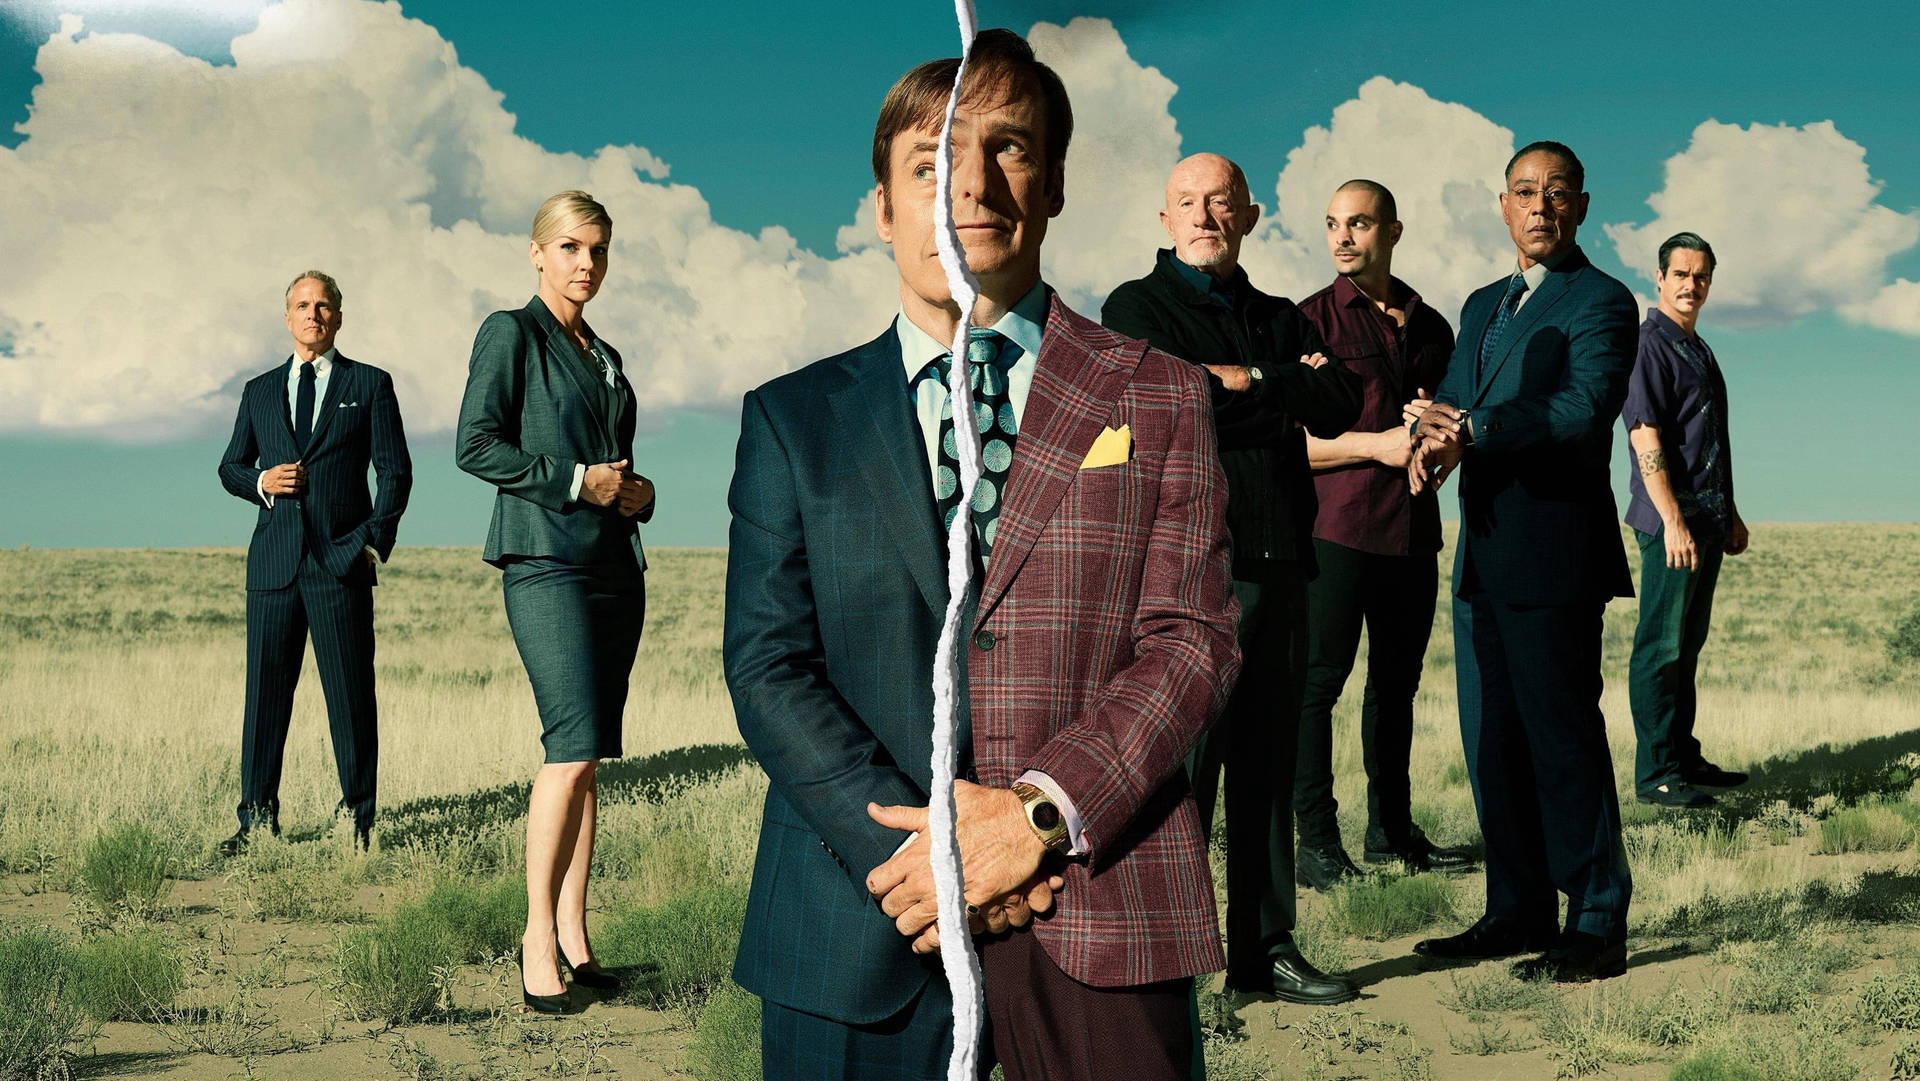 Main characters of Better Call Saul Series in an intense meeting Wallpaper